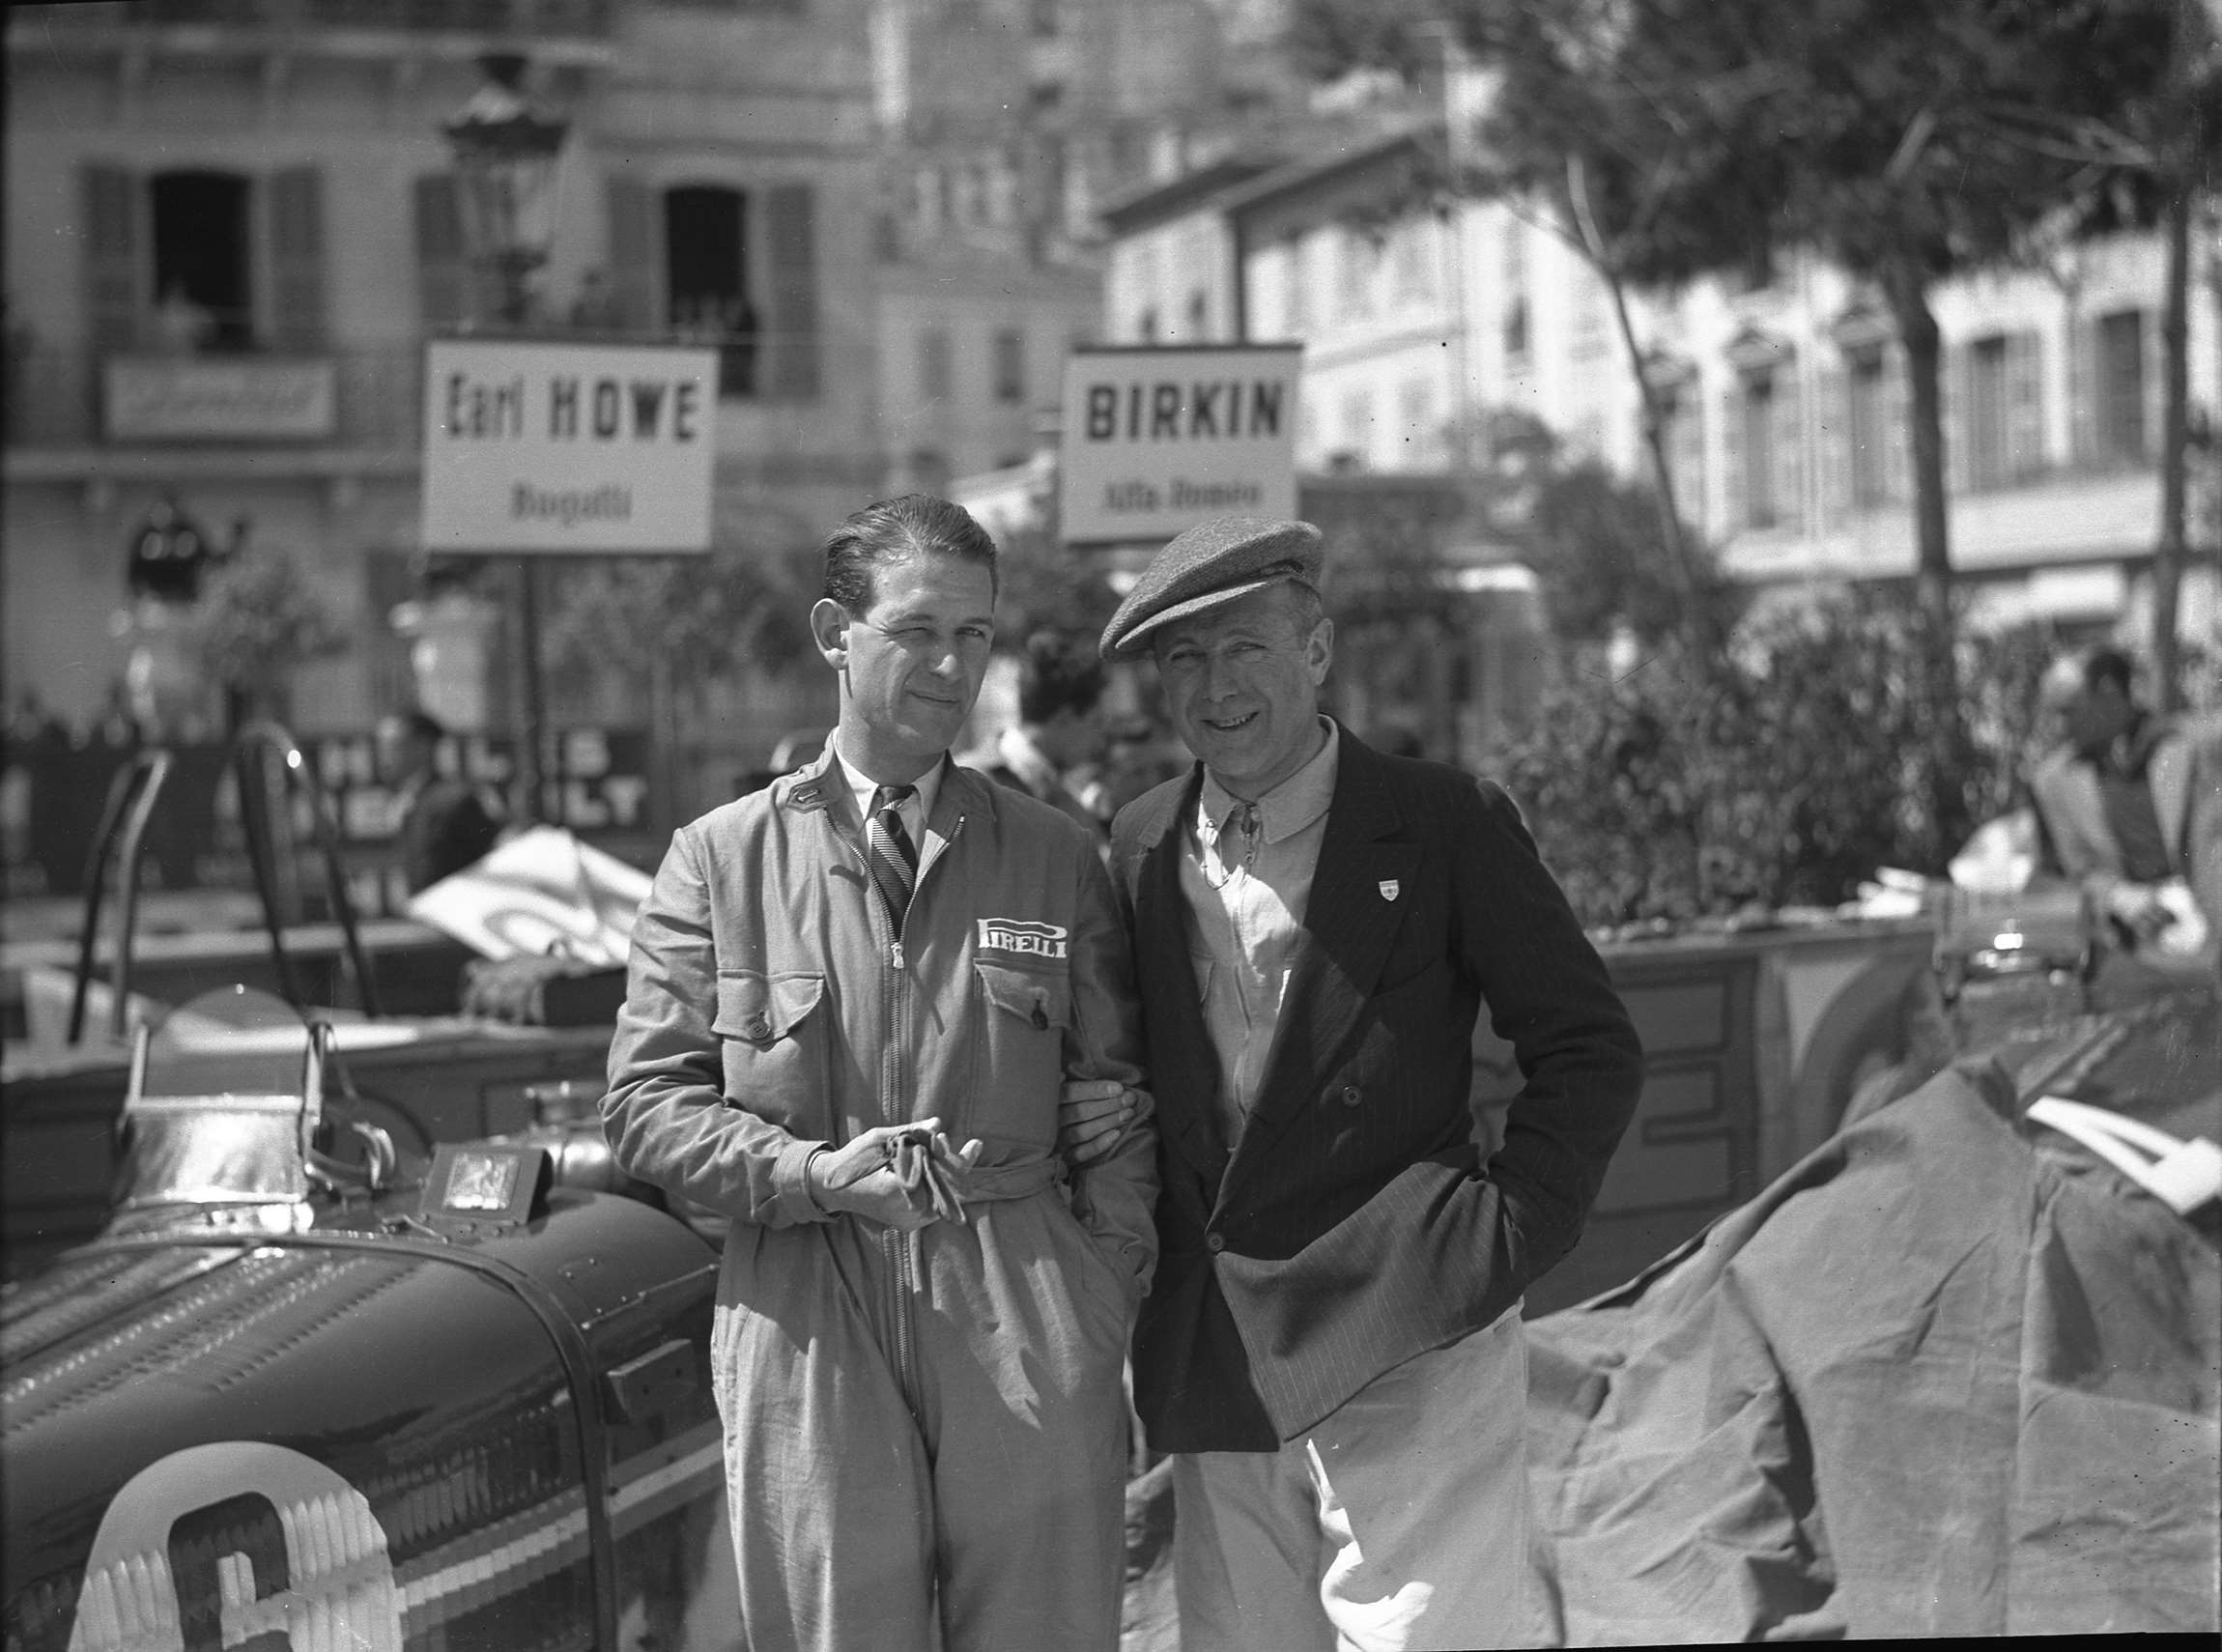 Toffs together - Raymond Sommer of France (left) - Francis, Earl Howe (right) in the pits at Monaco 1933